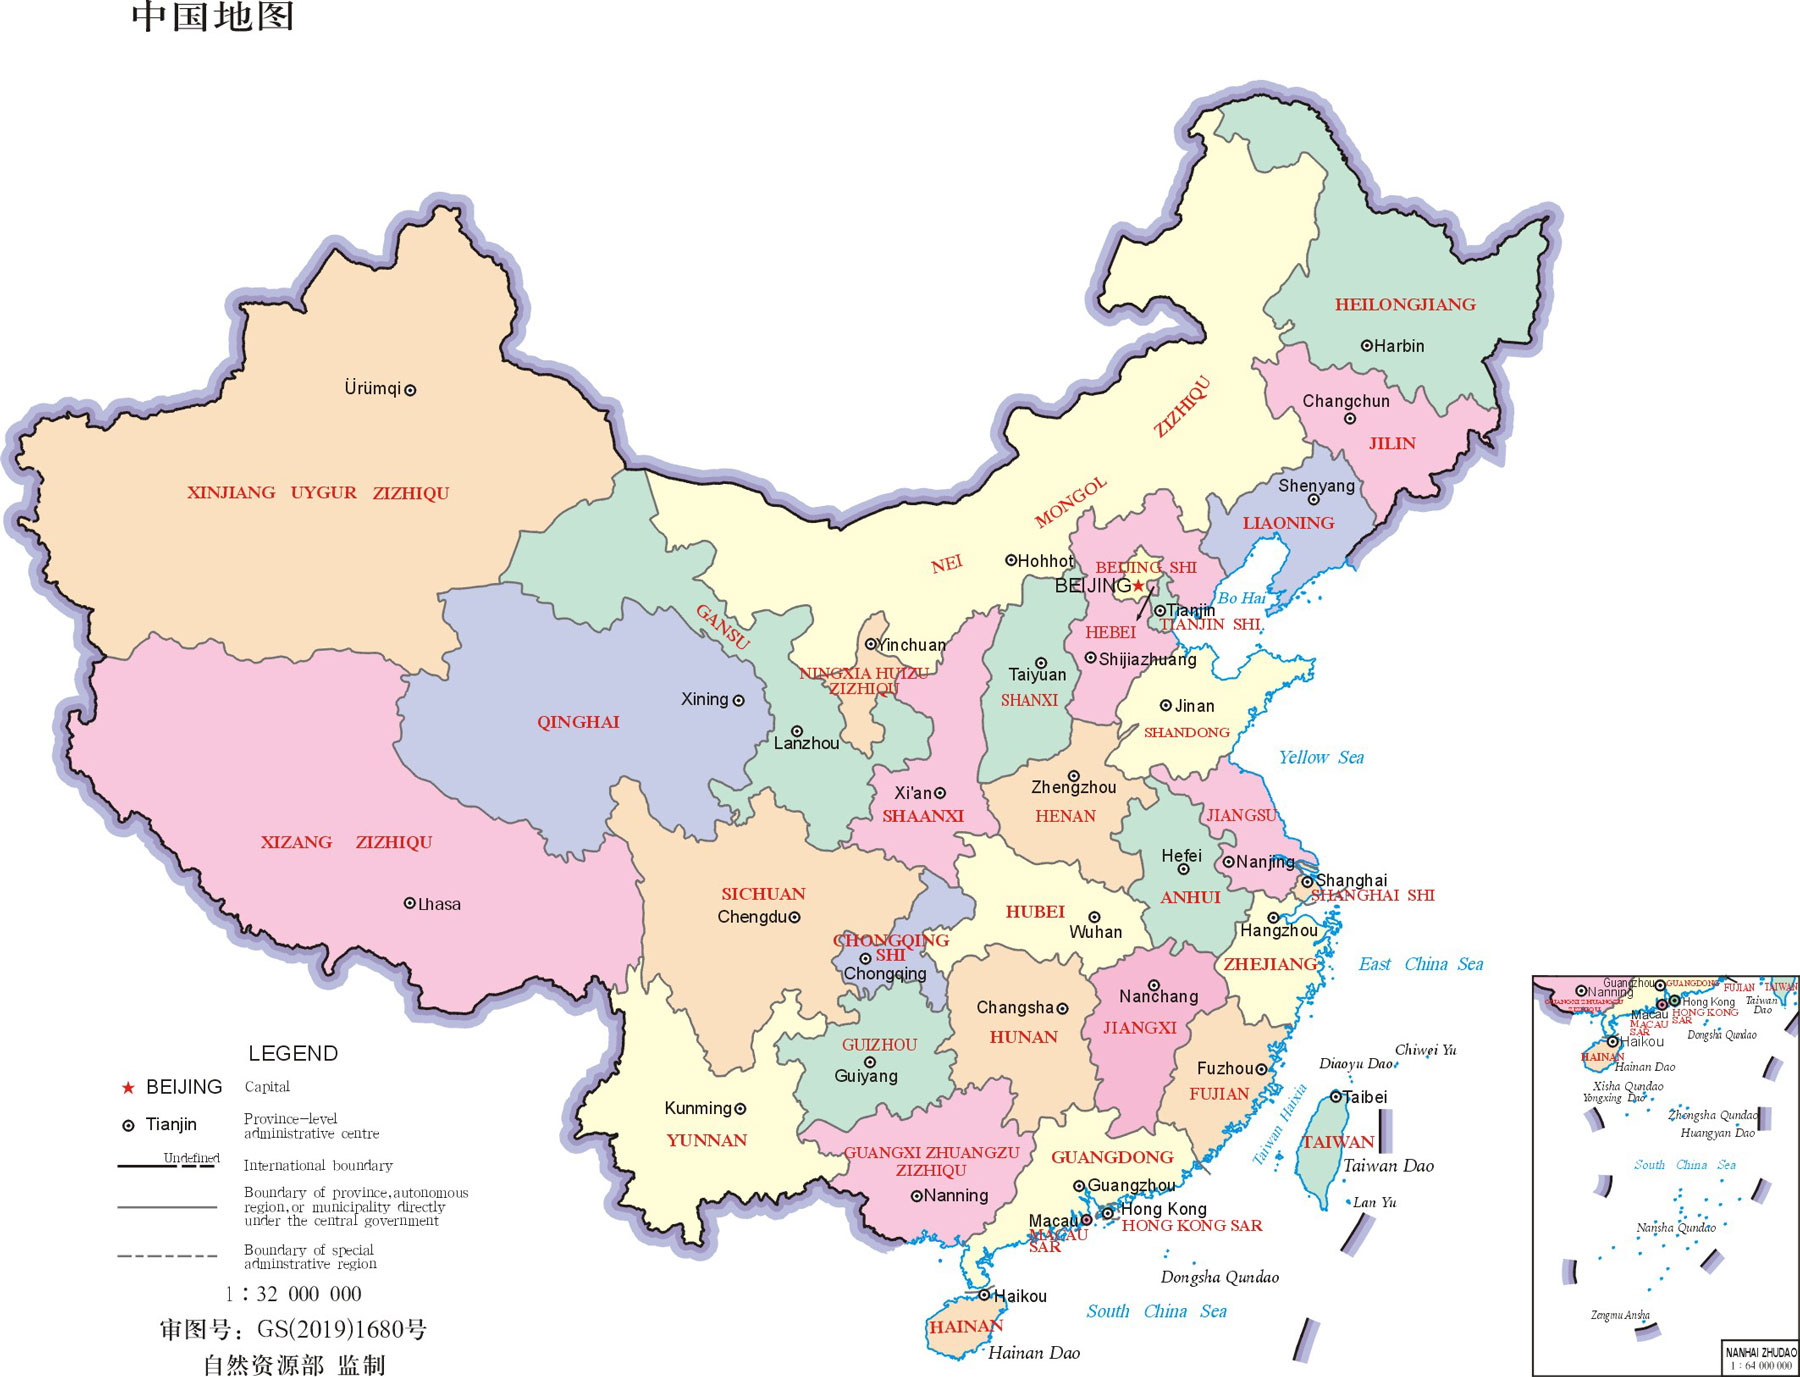 Show Me A Map Of China China Provincial Map, Map of China Provinces, China Maps 2020